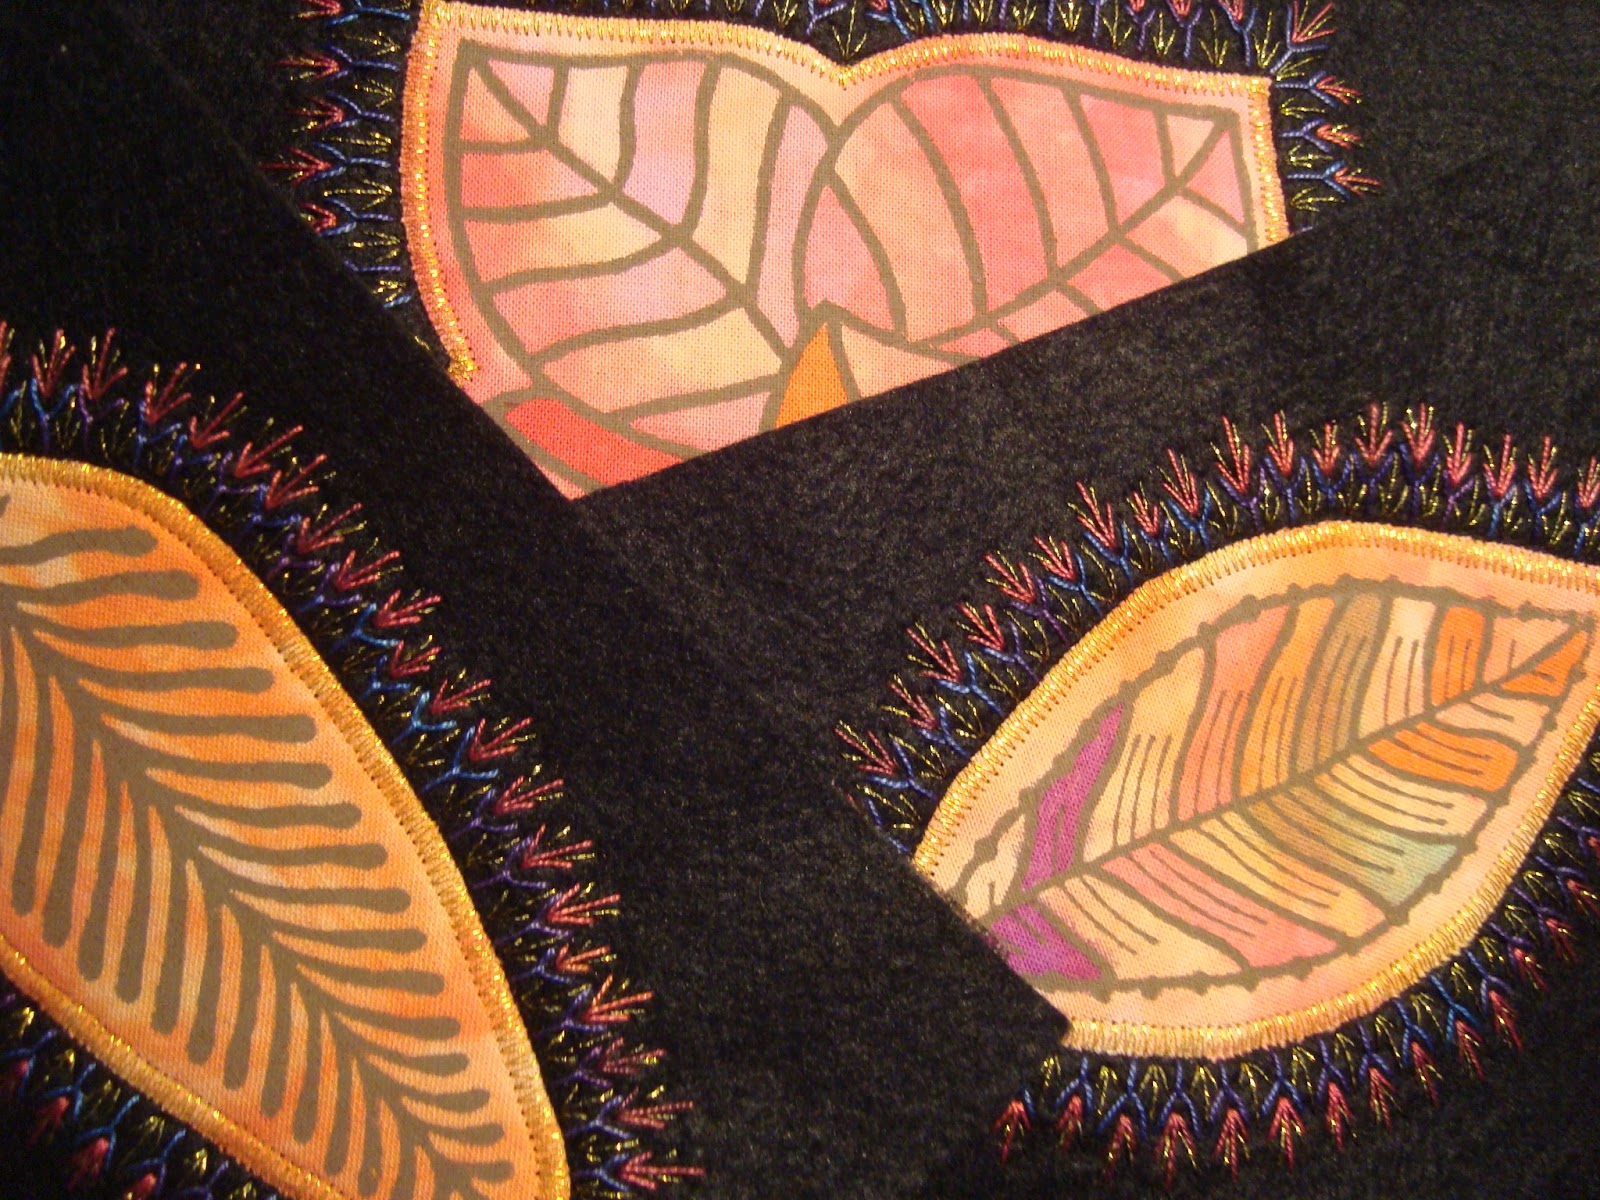 Textile Butterfly: Back to stitching...